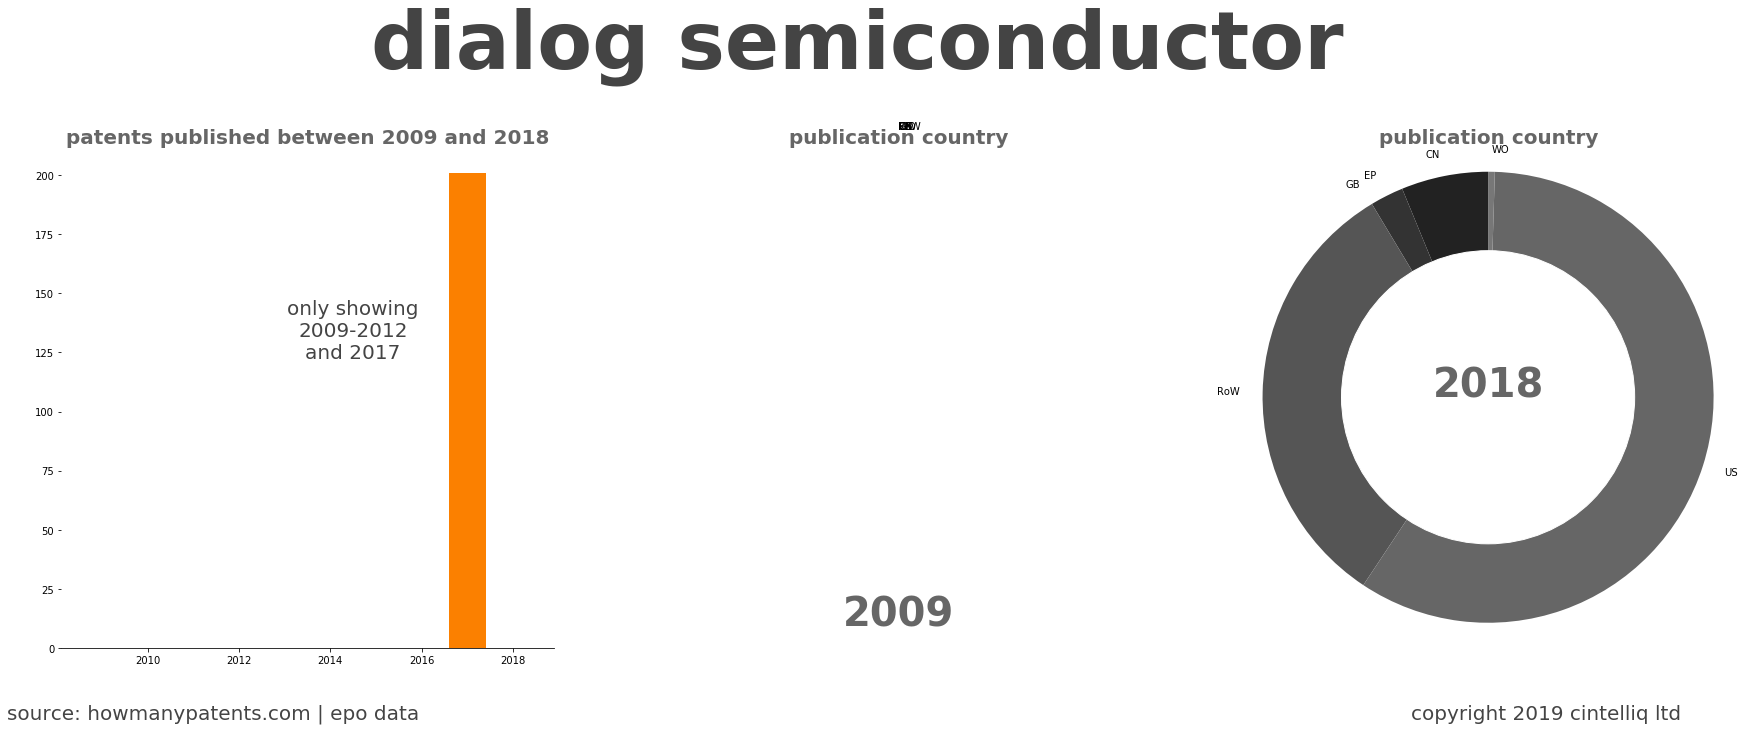 summary of patents for Dialog Semiconductor 